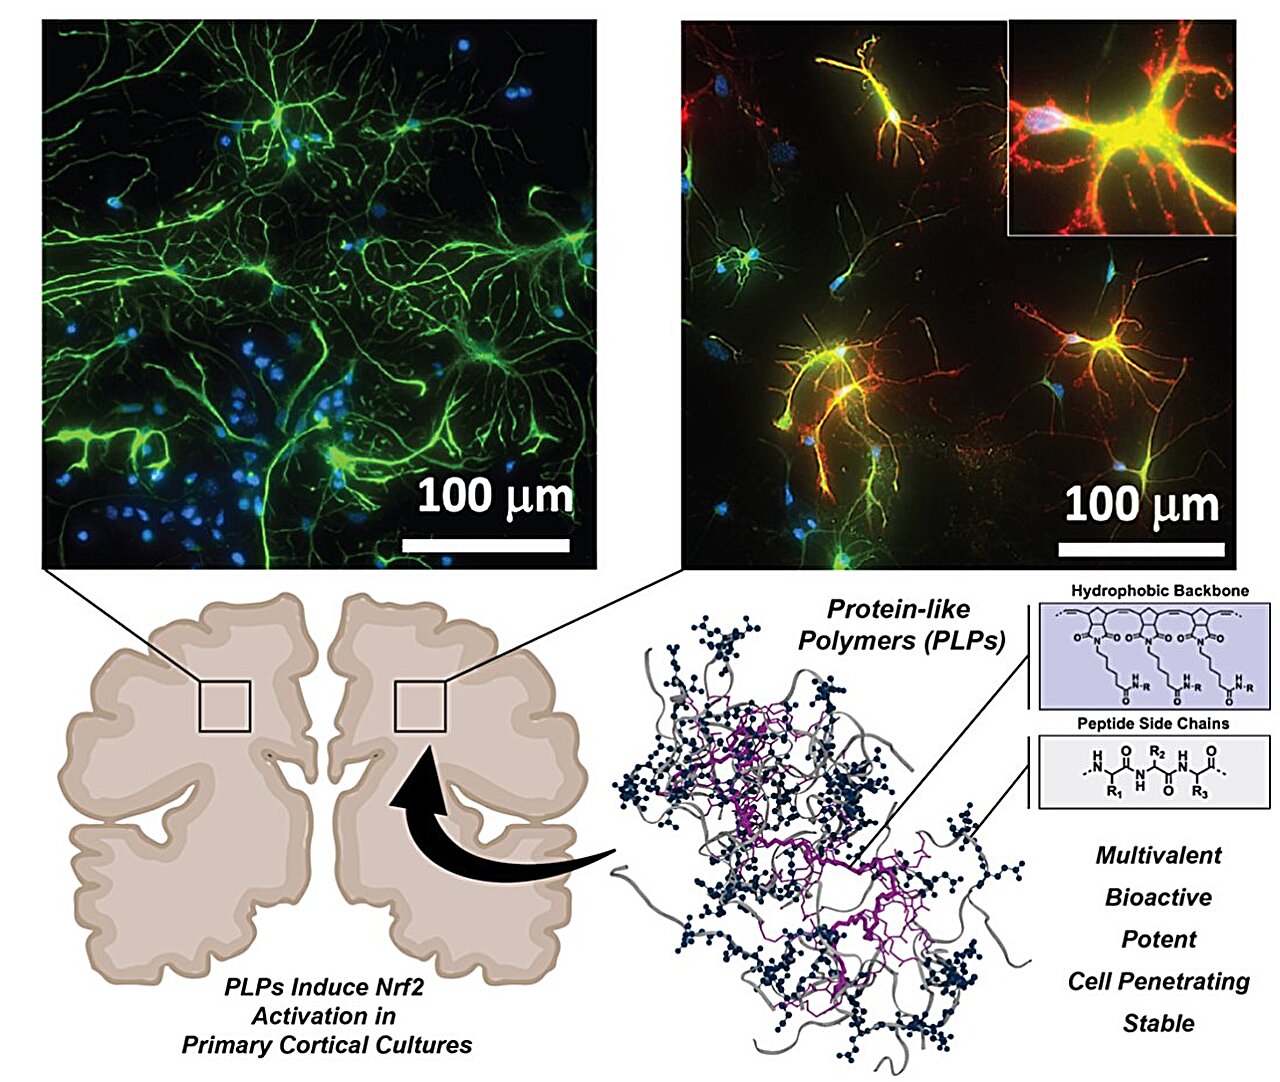 Targeting 'undruggable' proteins promises new approach for treating neurodegenerative diseases